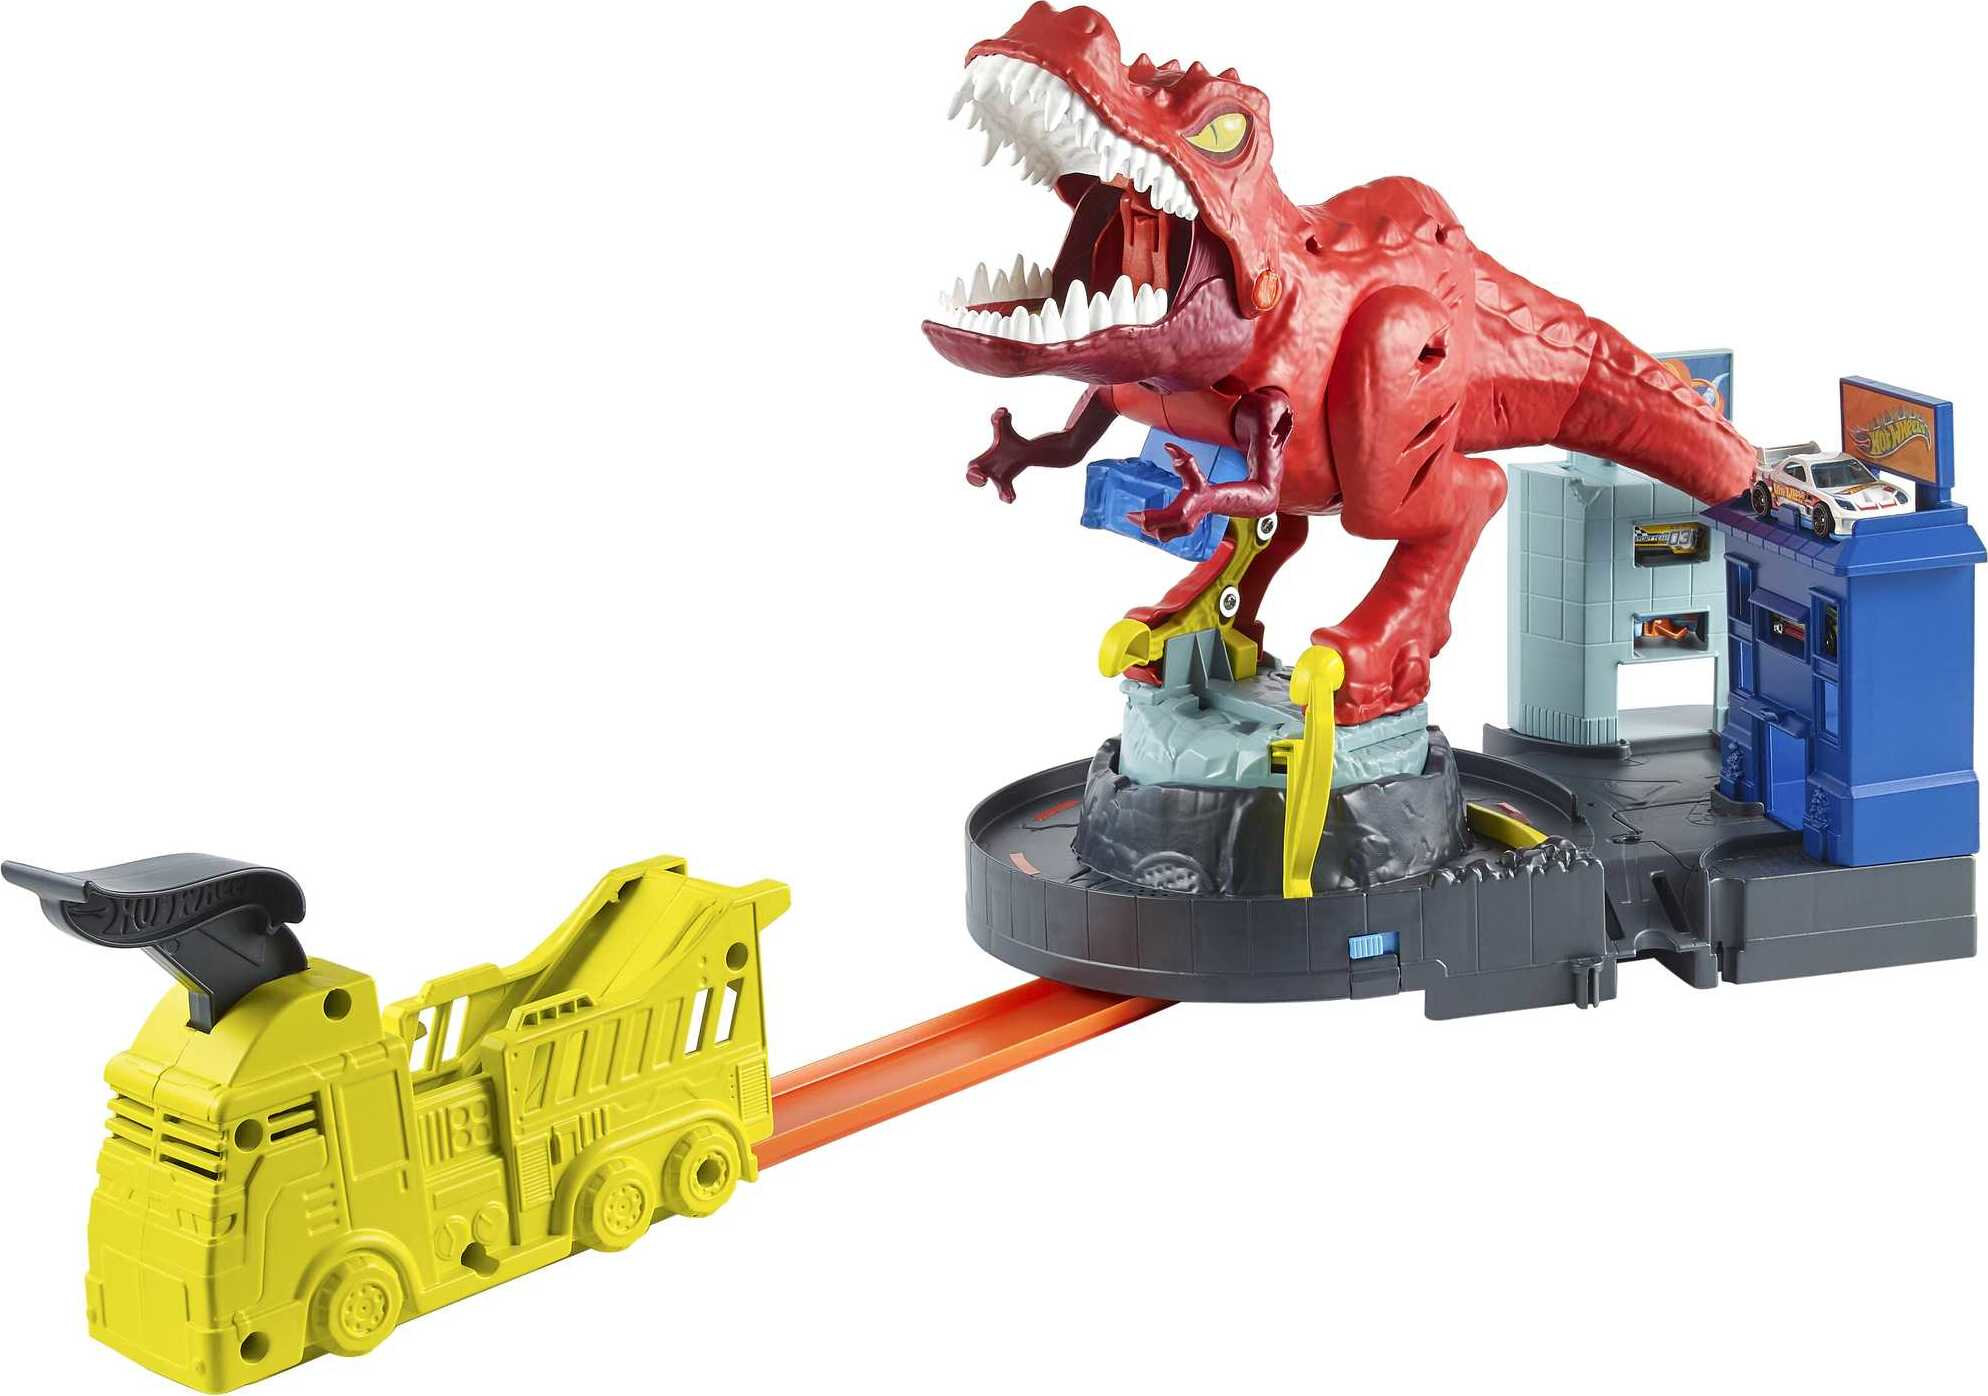 Hot Wheels T-Rex Rampage Track Set , Works With Hot Wheels City Sets, Toys for Kids Ages 5 to 10 - image 1 of 7